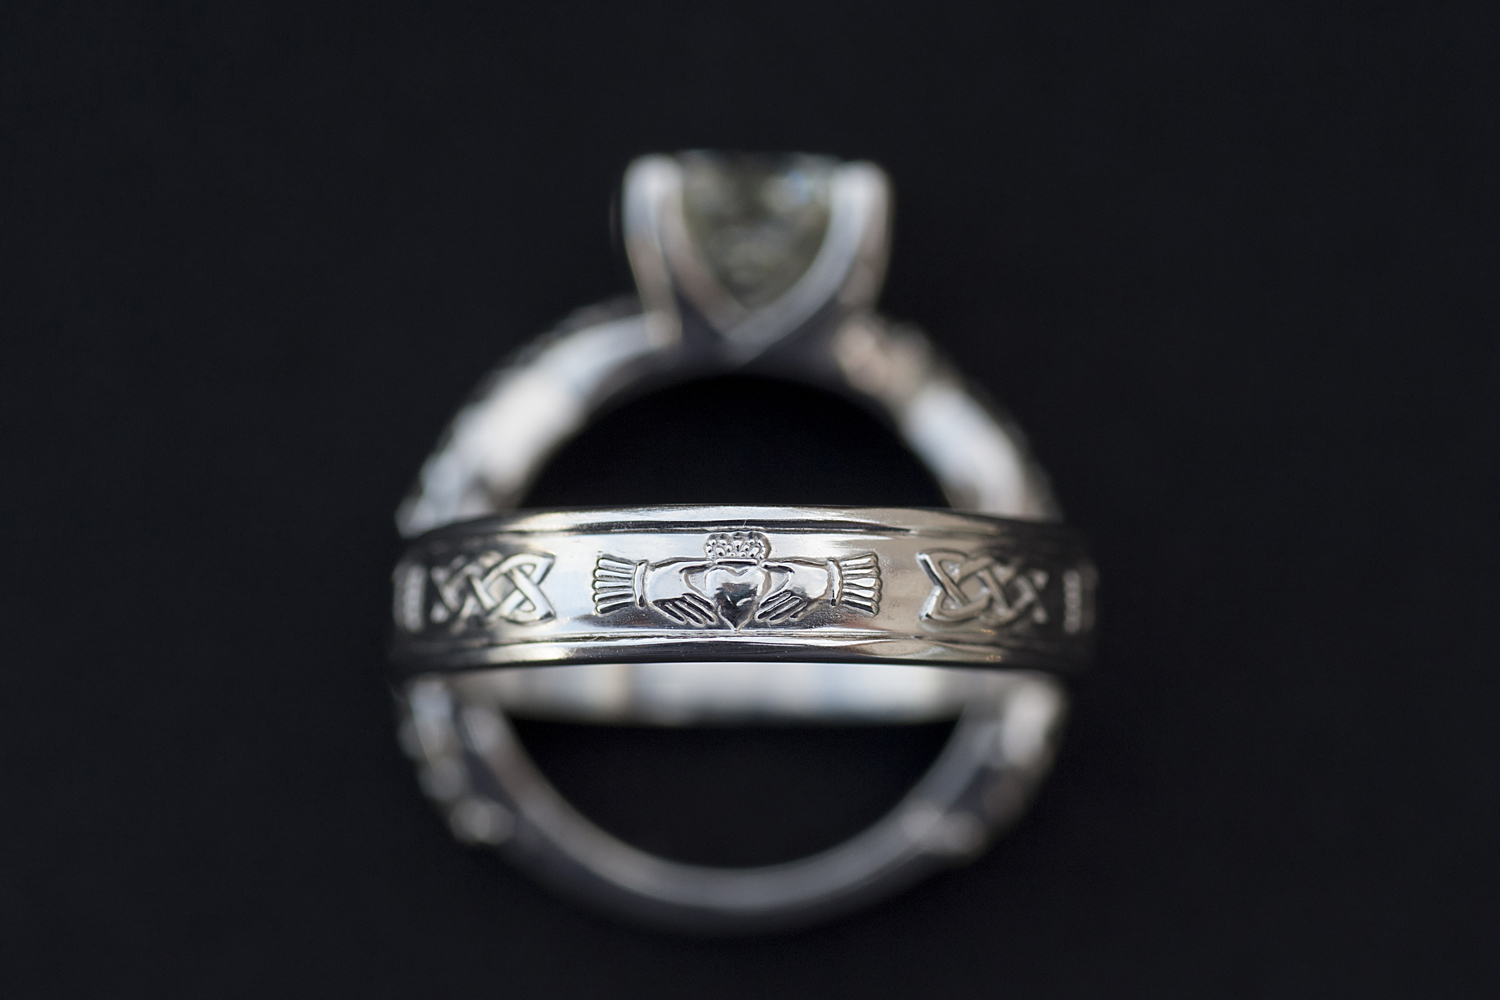 claddagh ring detail with engagement ring against black background. 